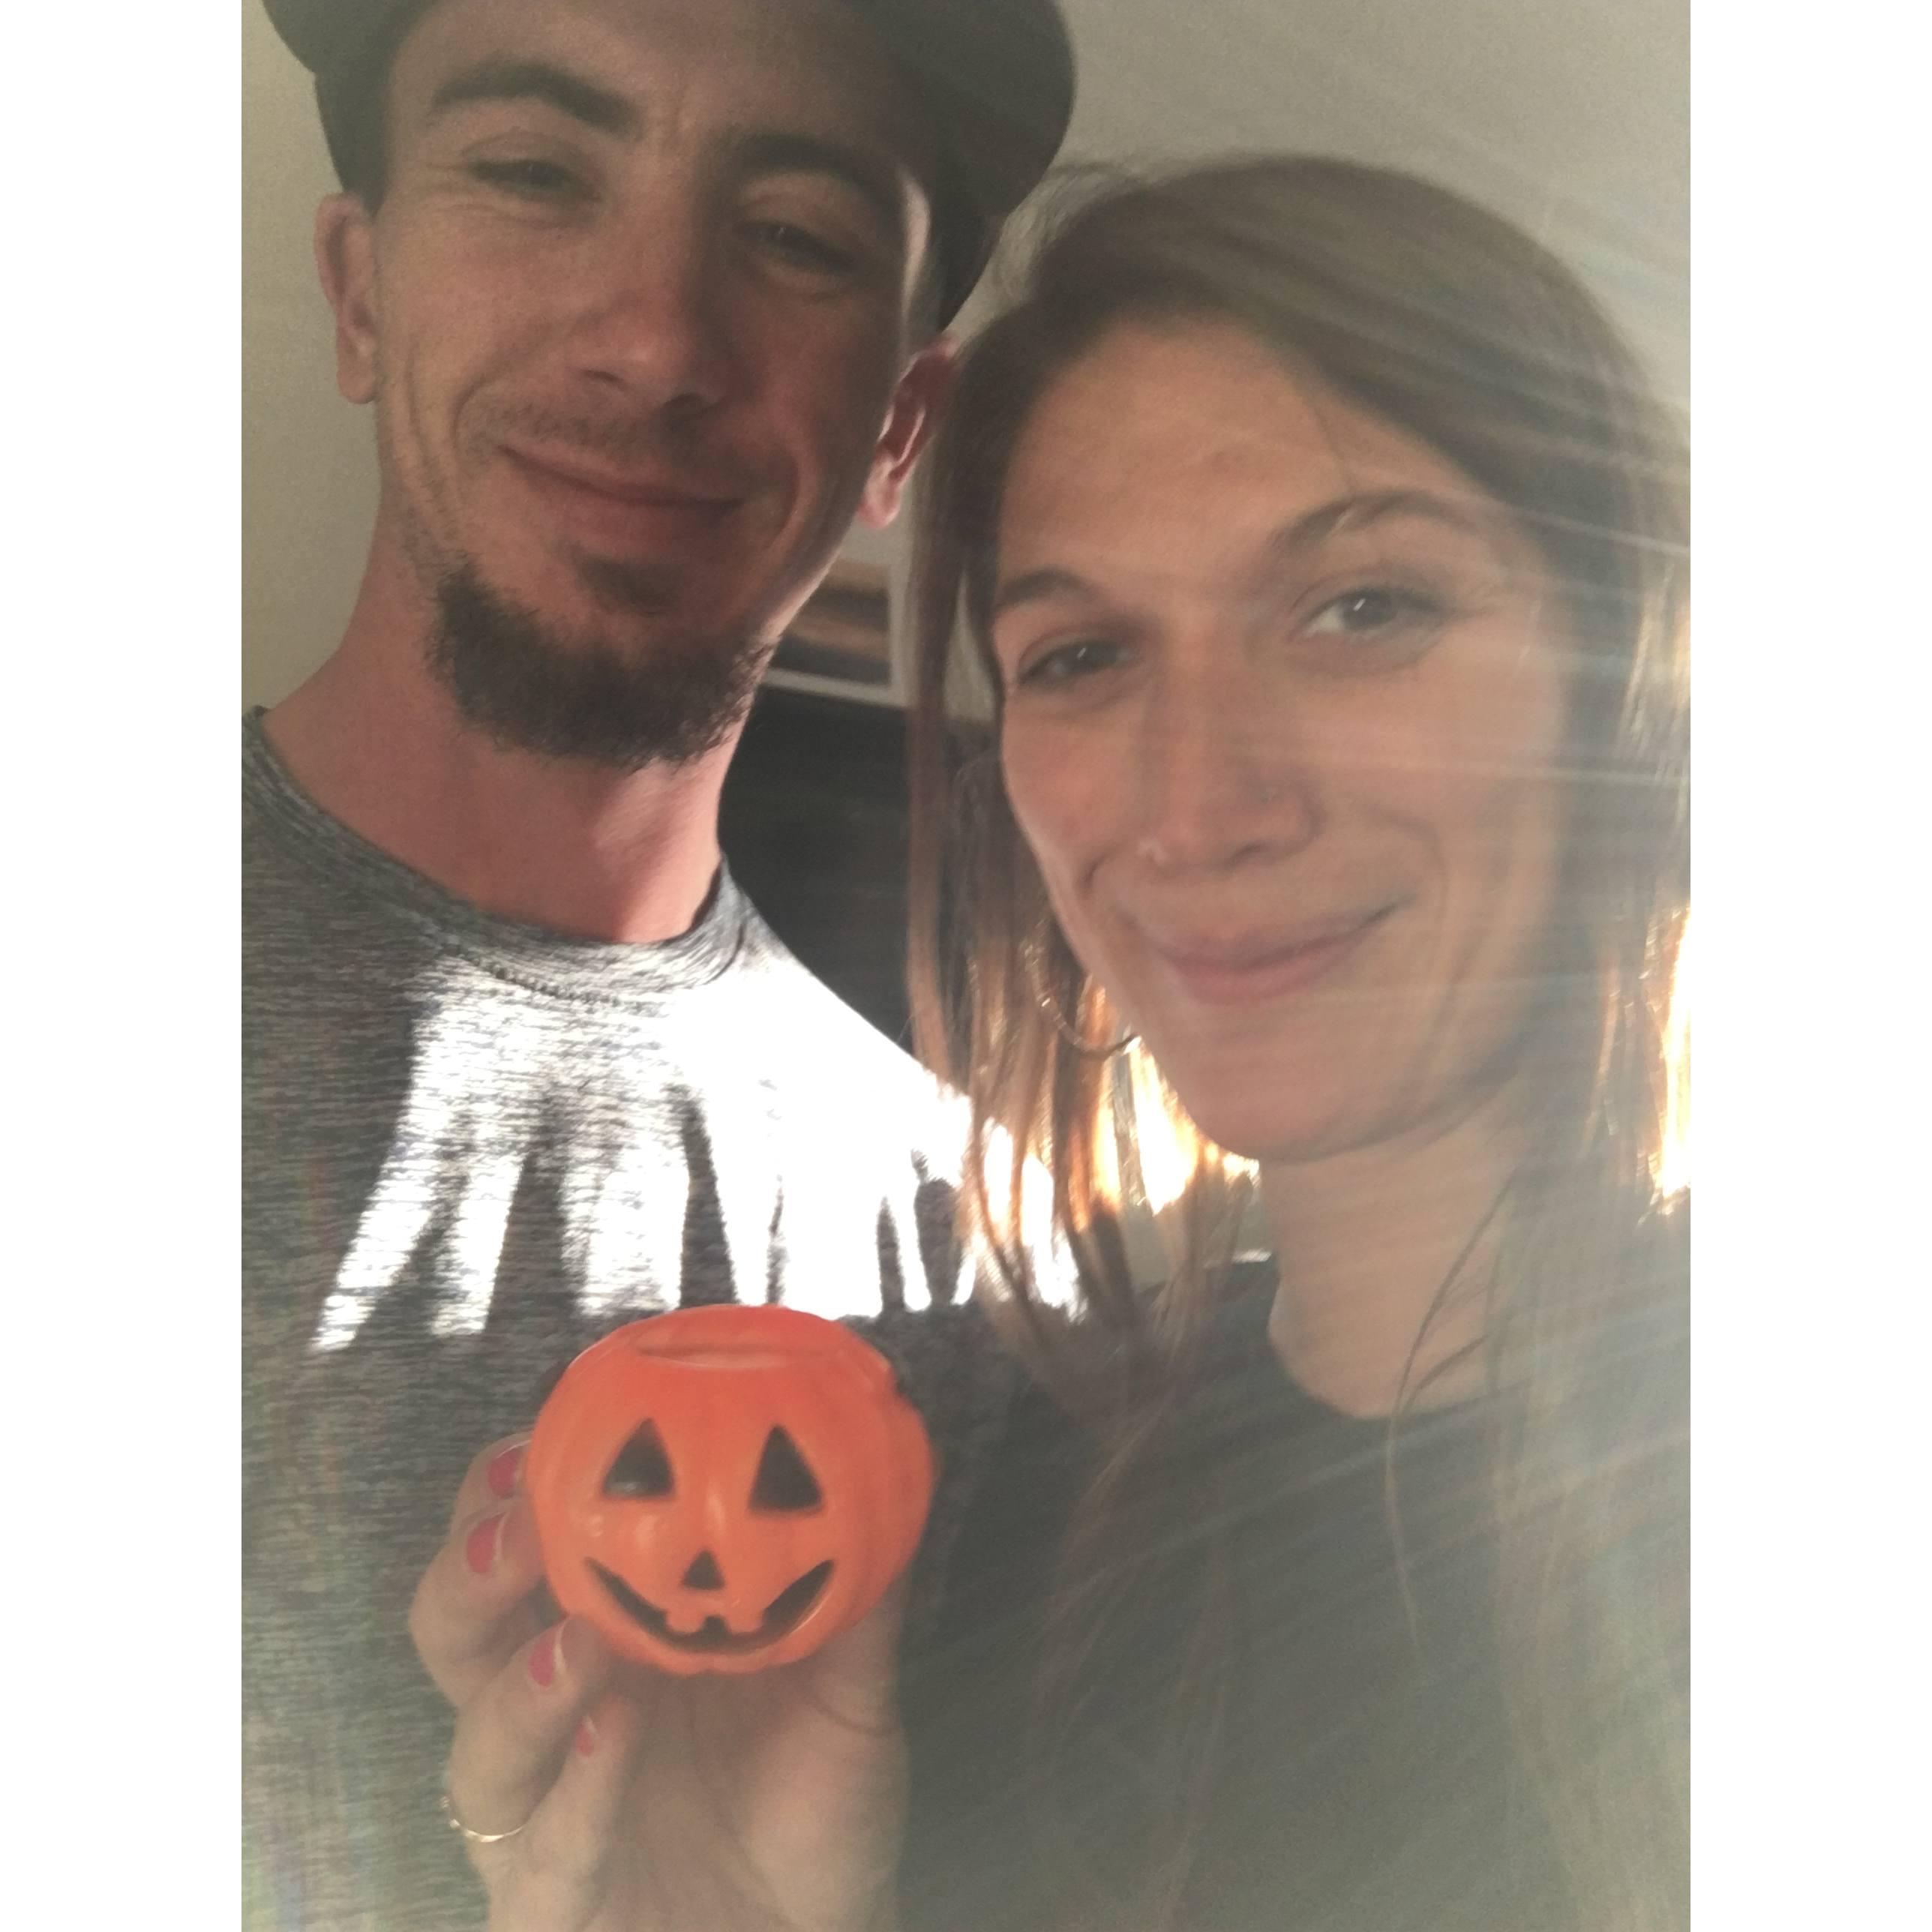 Our First Halloween living together!